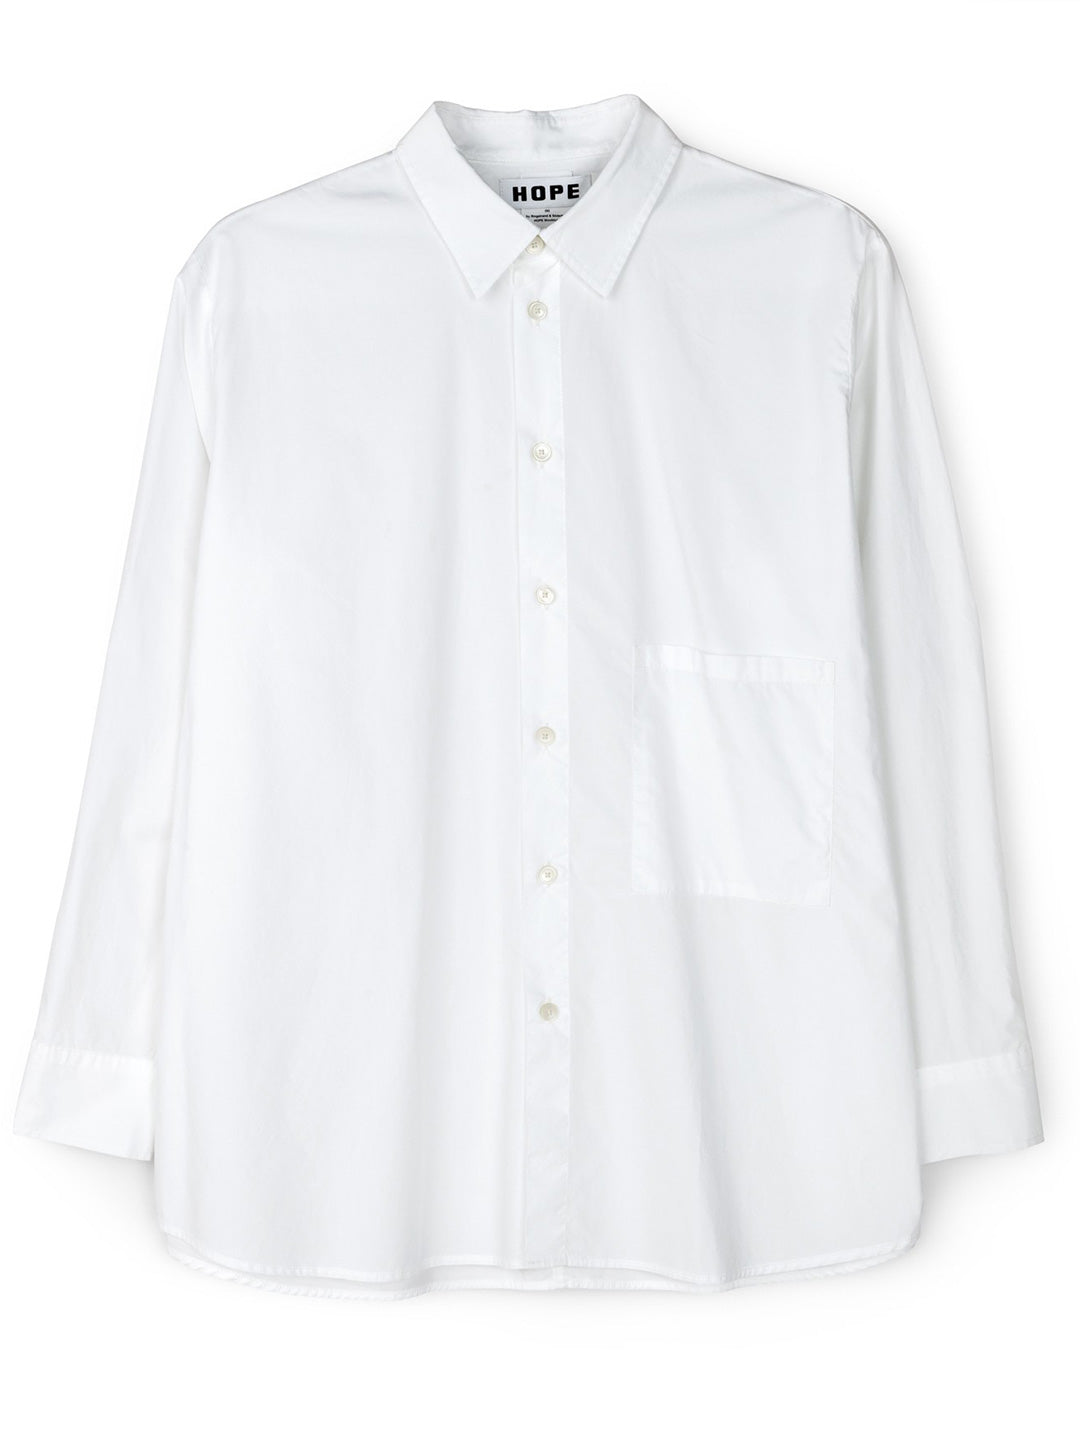 ELMA SHIRT IN WHITE BY HOPE